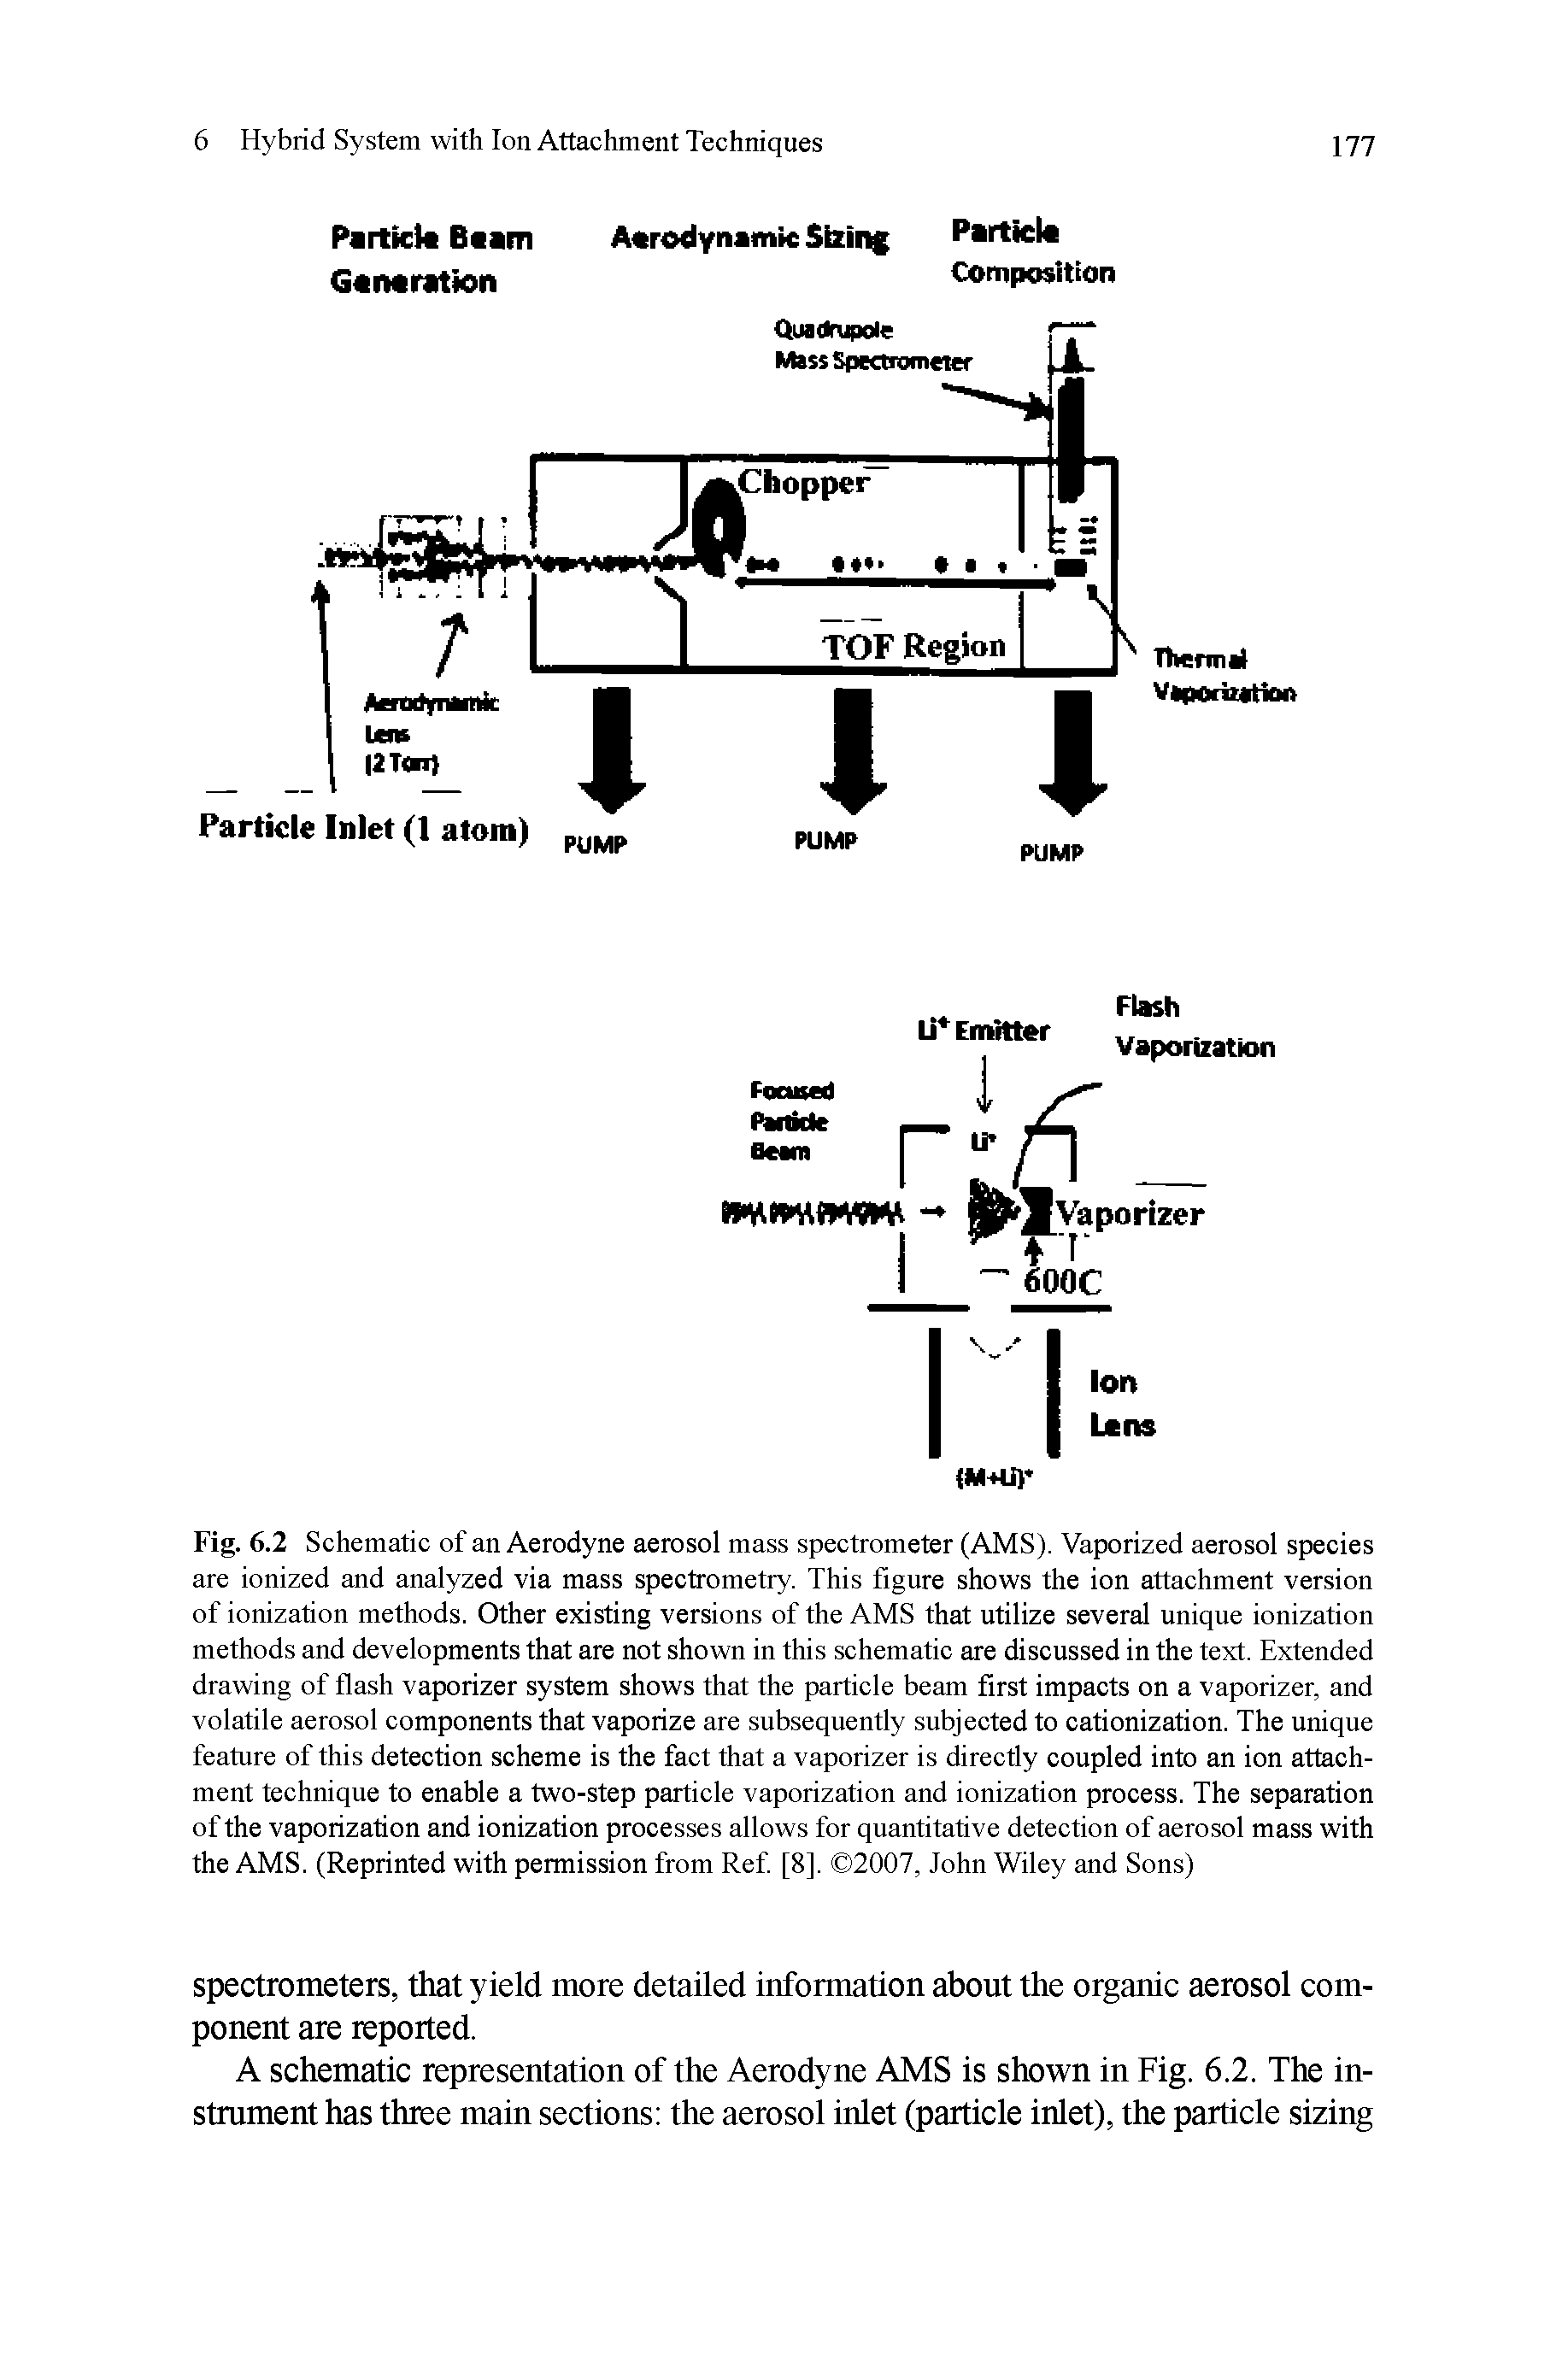 Fig. 6.2 Schematic of an Aerodyne aerosol mass spectrometer (AMS). Vaporized aerosol species are ionized and analyzed via mass spectrometry. This figure shows the ion attachment version of ionization methods. Other existing versions of the AMS that utilize several unique ionization methods and developments that are not shown in this schematic are discussed in the text. Extended drawing of flash vaporizer system shows that the particle beam first impacts on a vaporizer, and volatile aerosol components that vaporize are subsequently subjected to cationization. The unique feature of this detection scheme is the fact that a vaporizer is directly coupled into an ion attachment technique to enable a two-step particle vaporization and ionization process. The separation of the vaporization and ionization processes allows for quantitative detection of aerosol mass with the AMS. (Reprinted with permission from Ref [8]. 2007, John Wiley and Sons)...